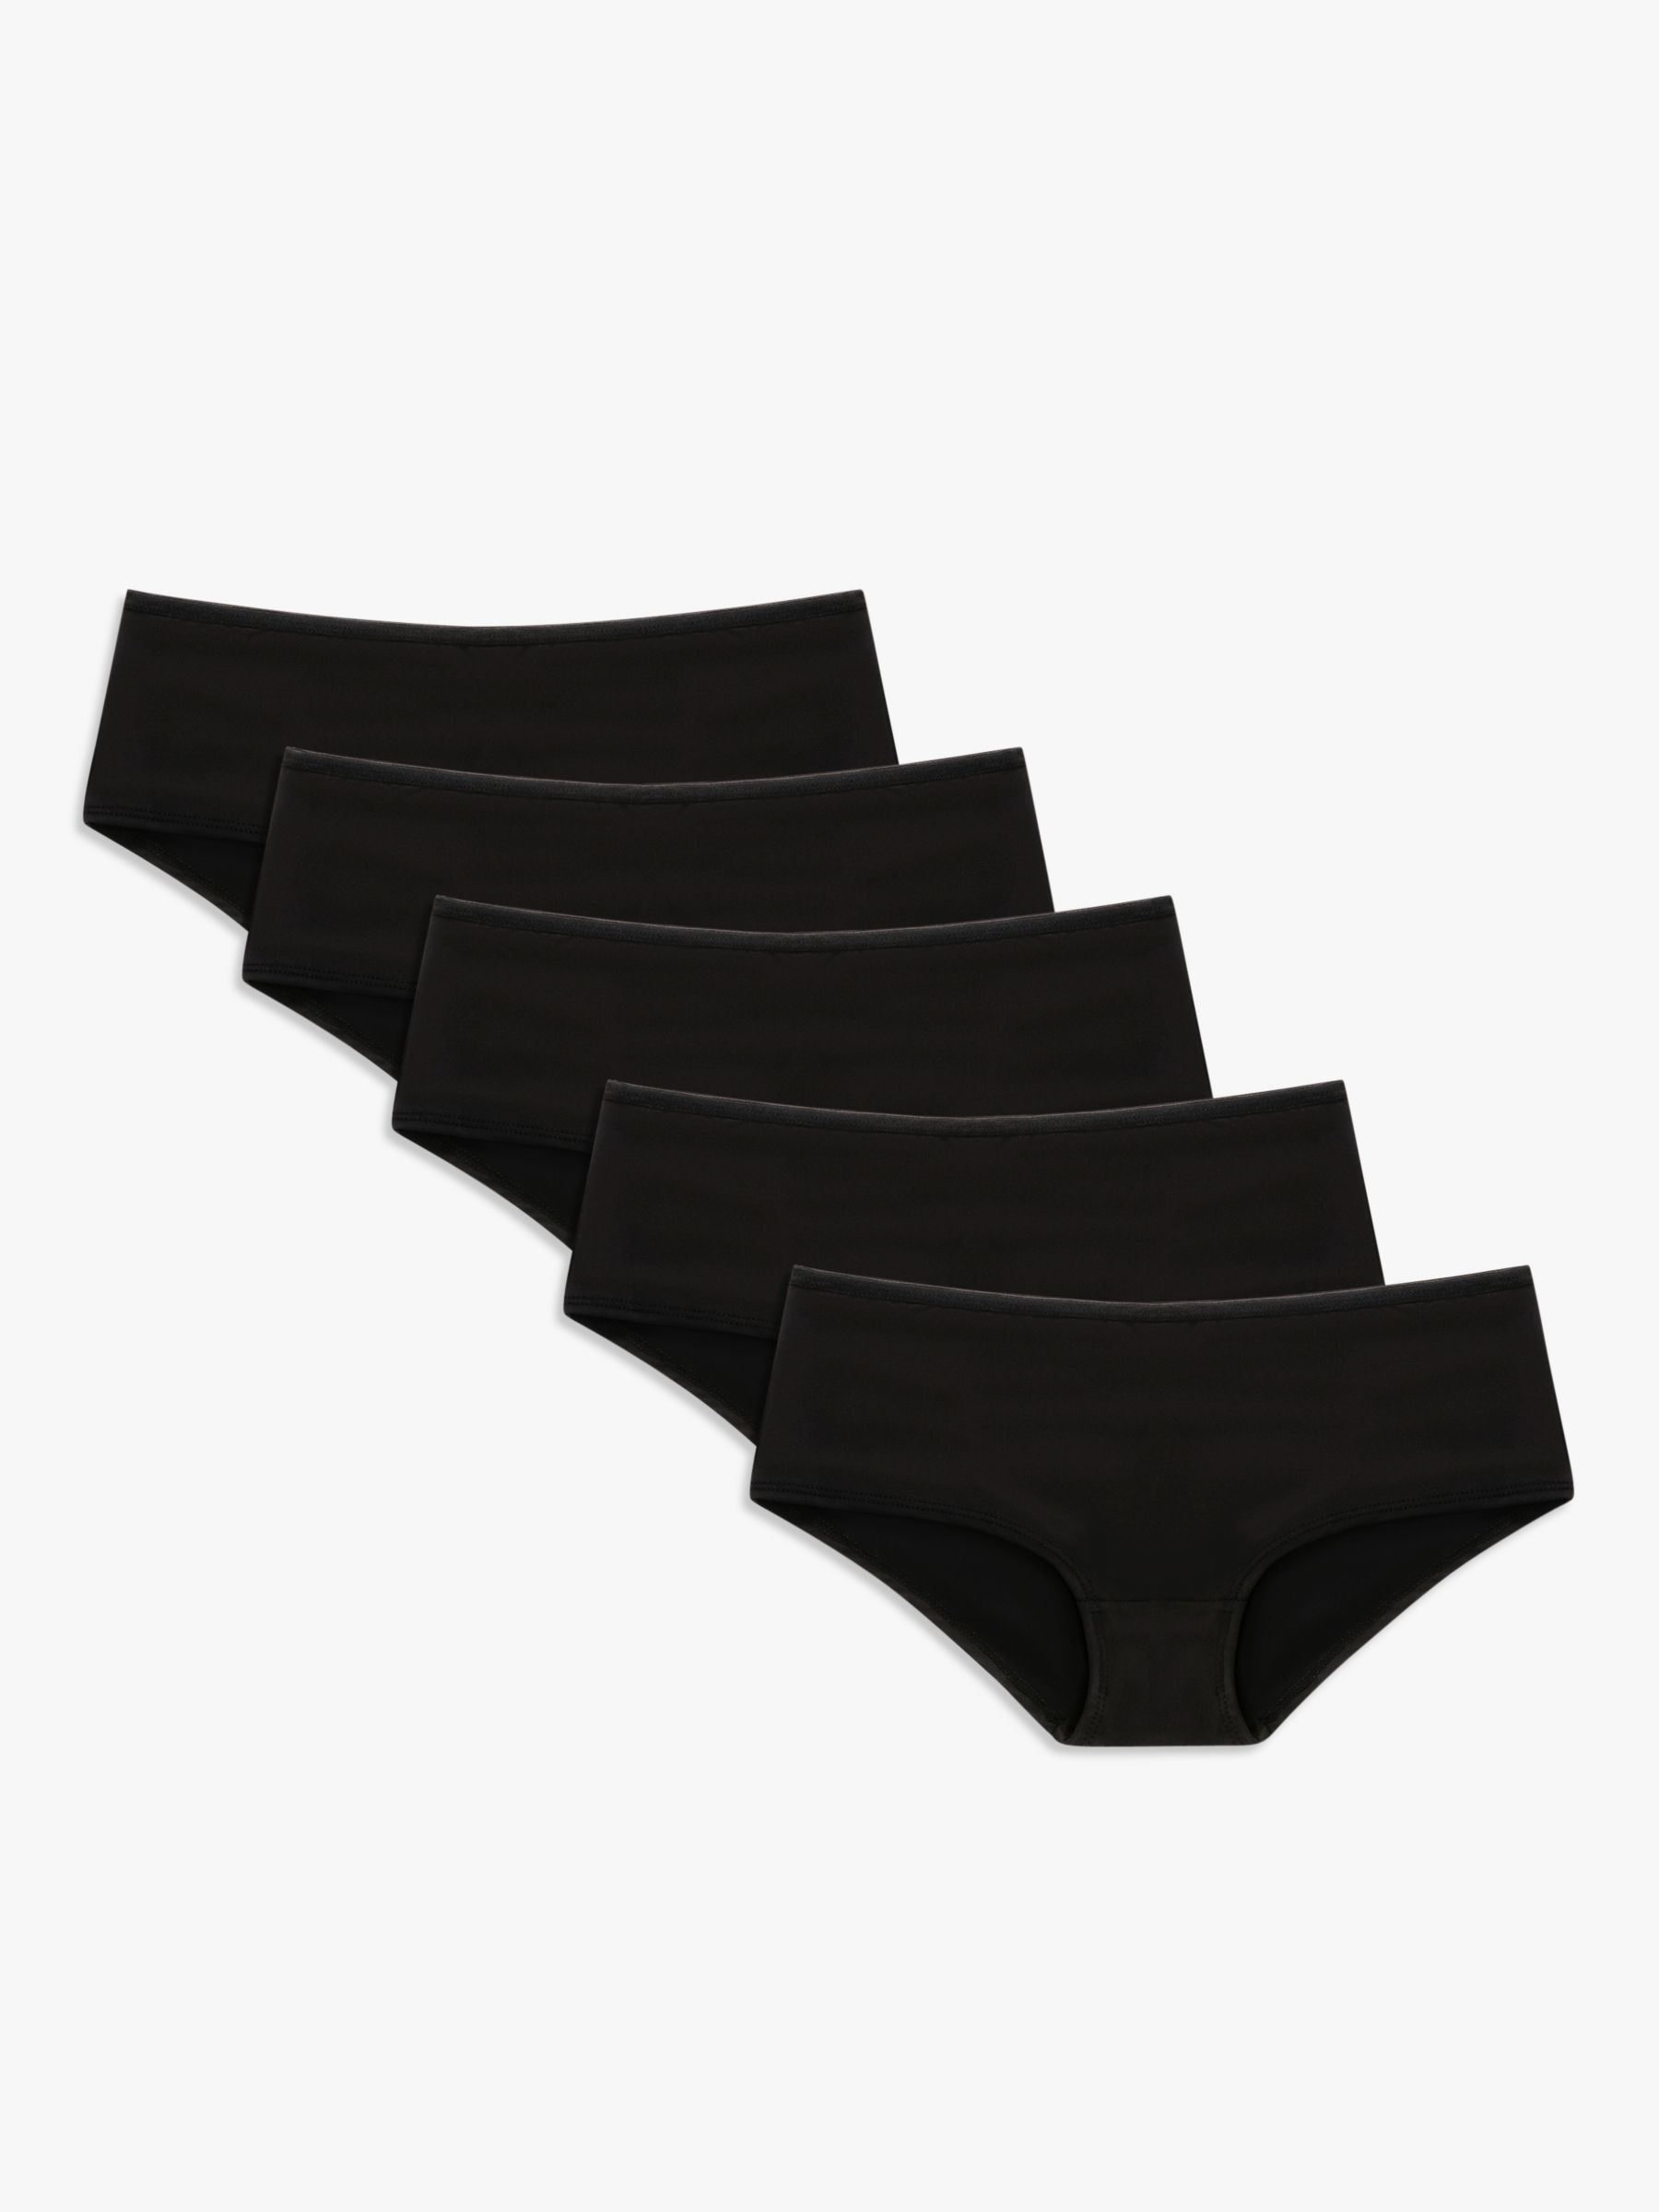 John Lewis ANYDAY Microfibre Short Knickers, Pack of 5, Black, 8